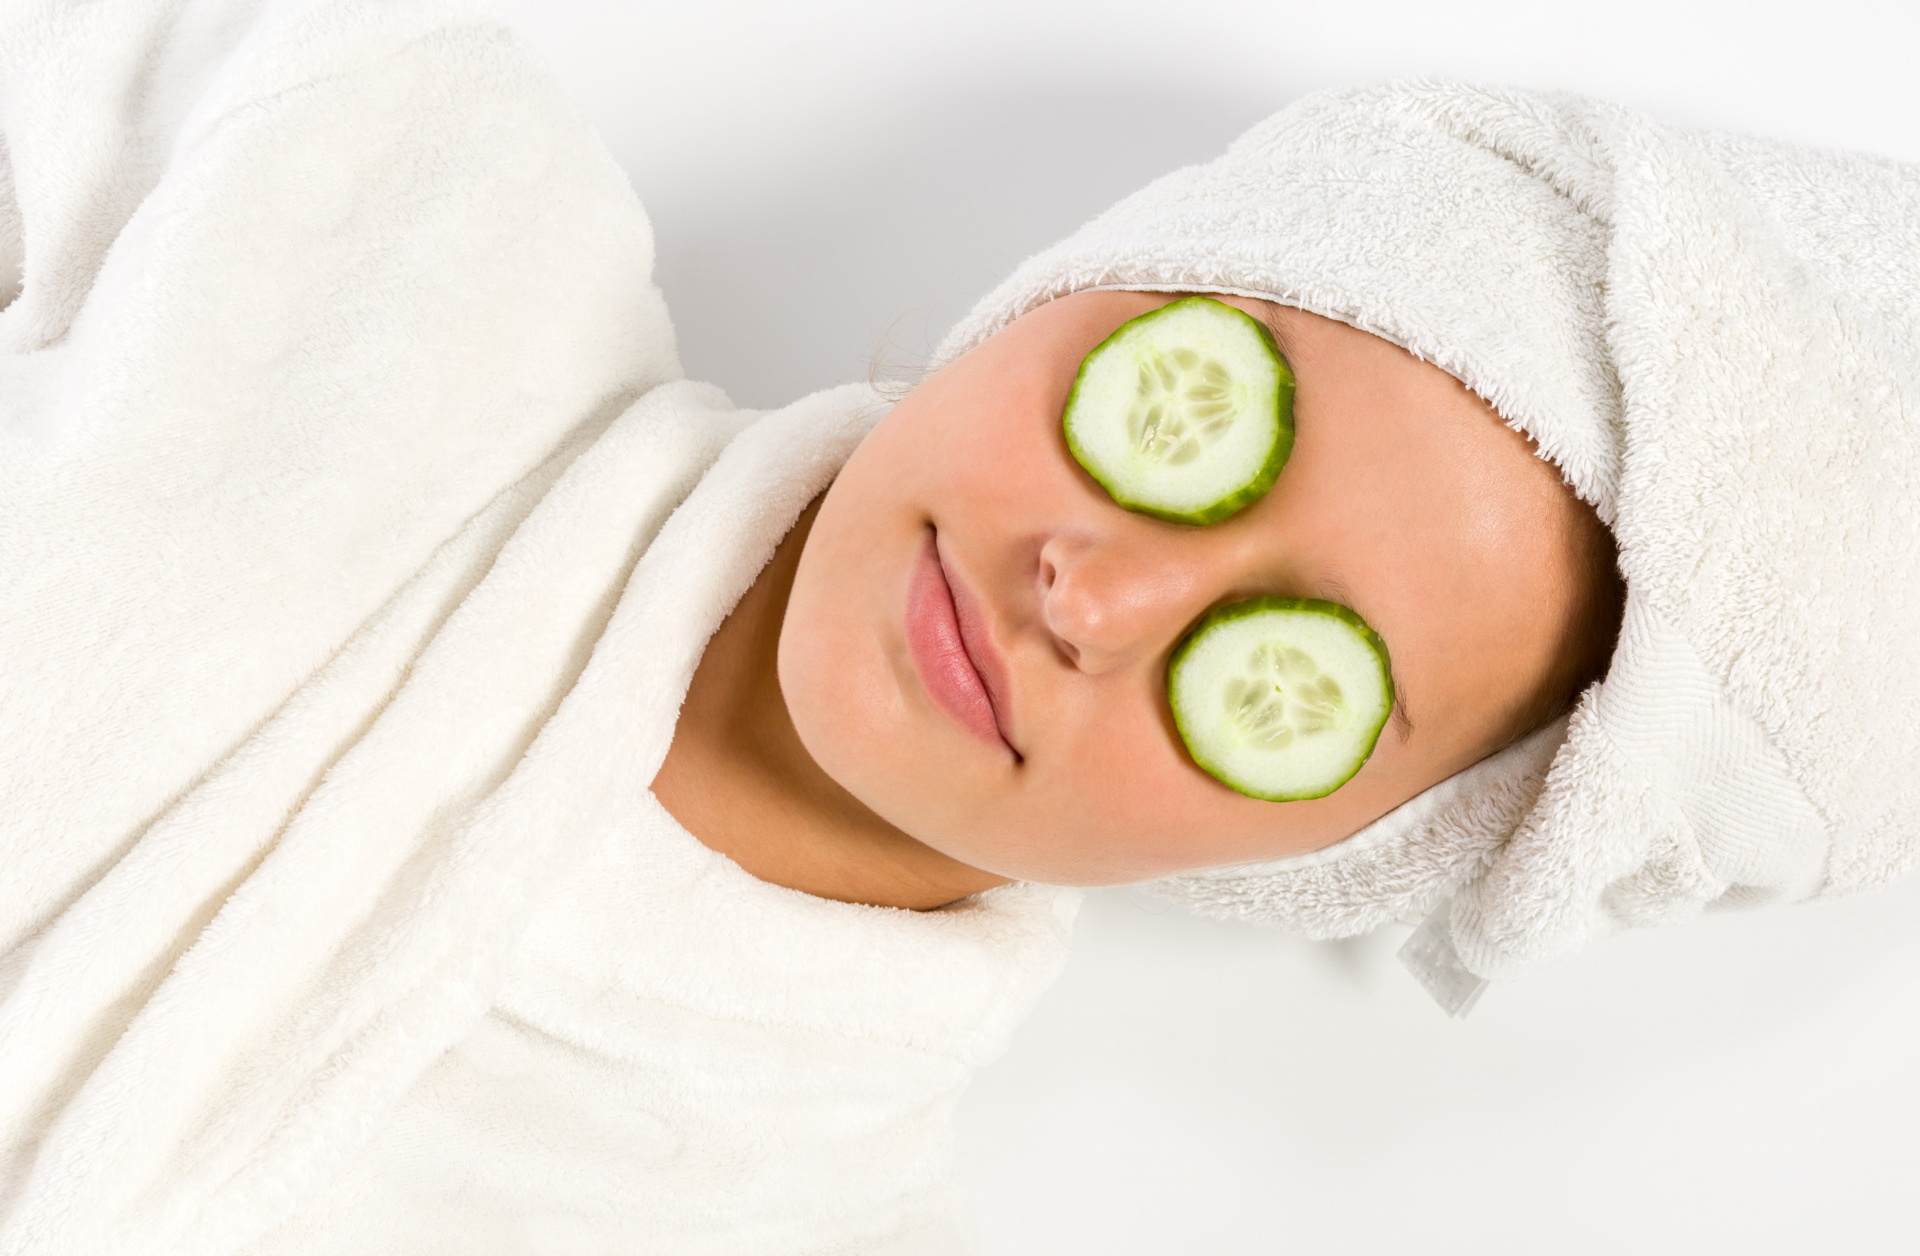 Woman With Cucumber On Eyes